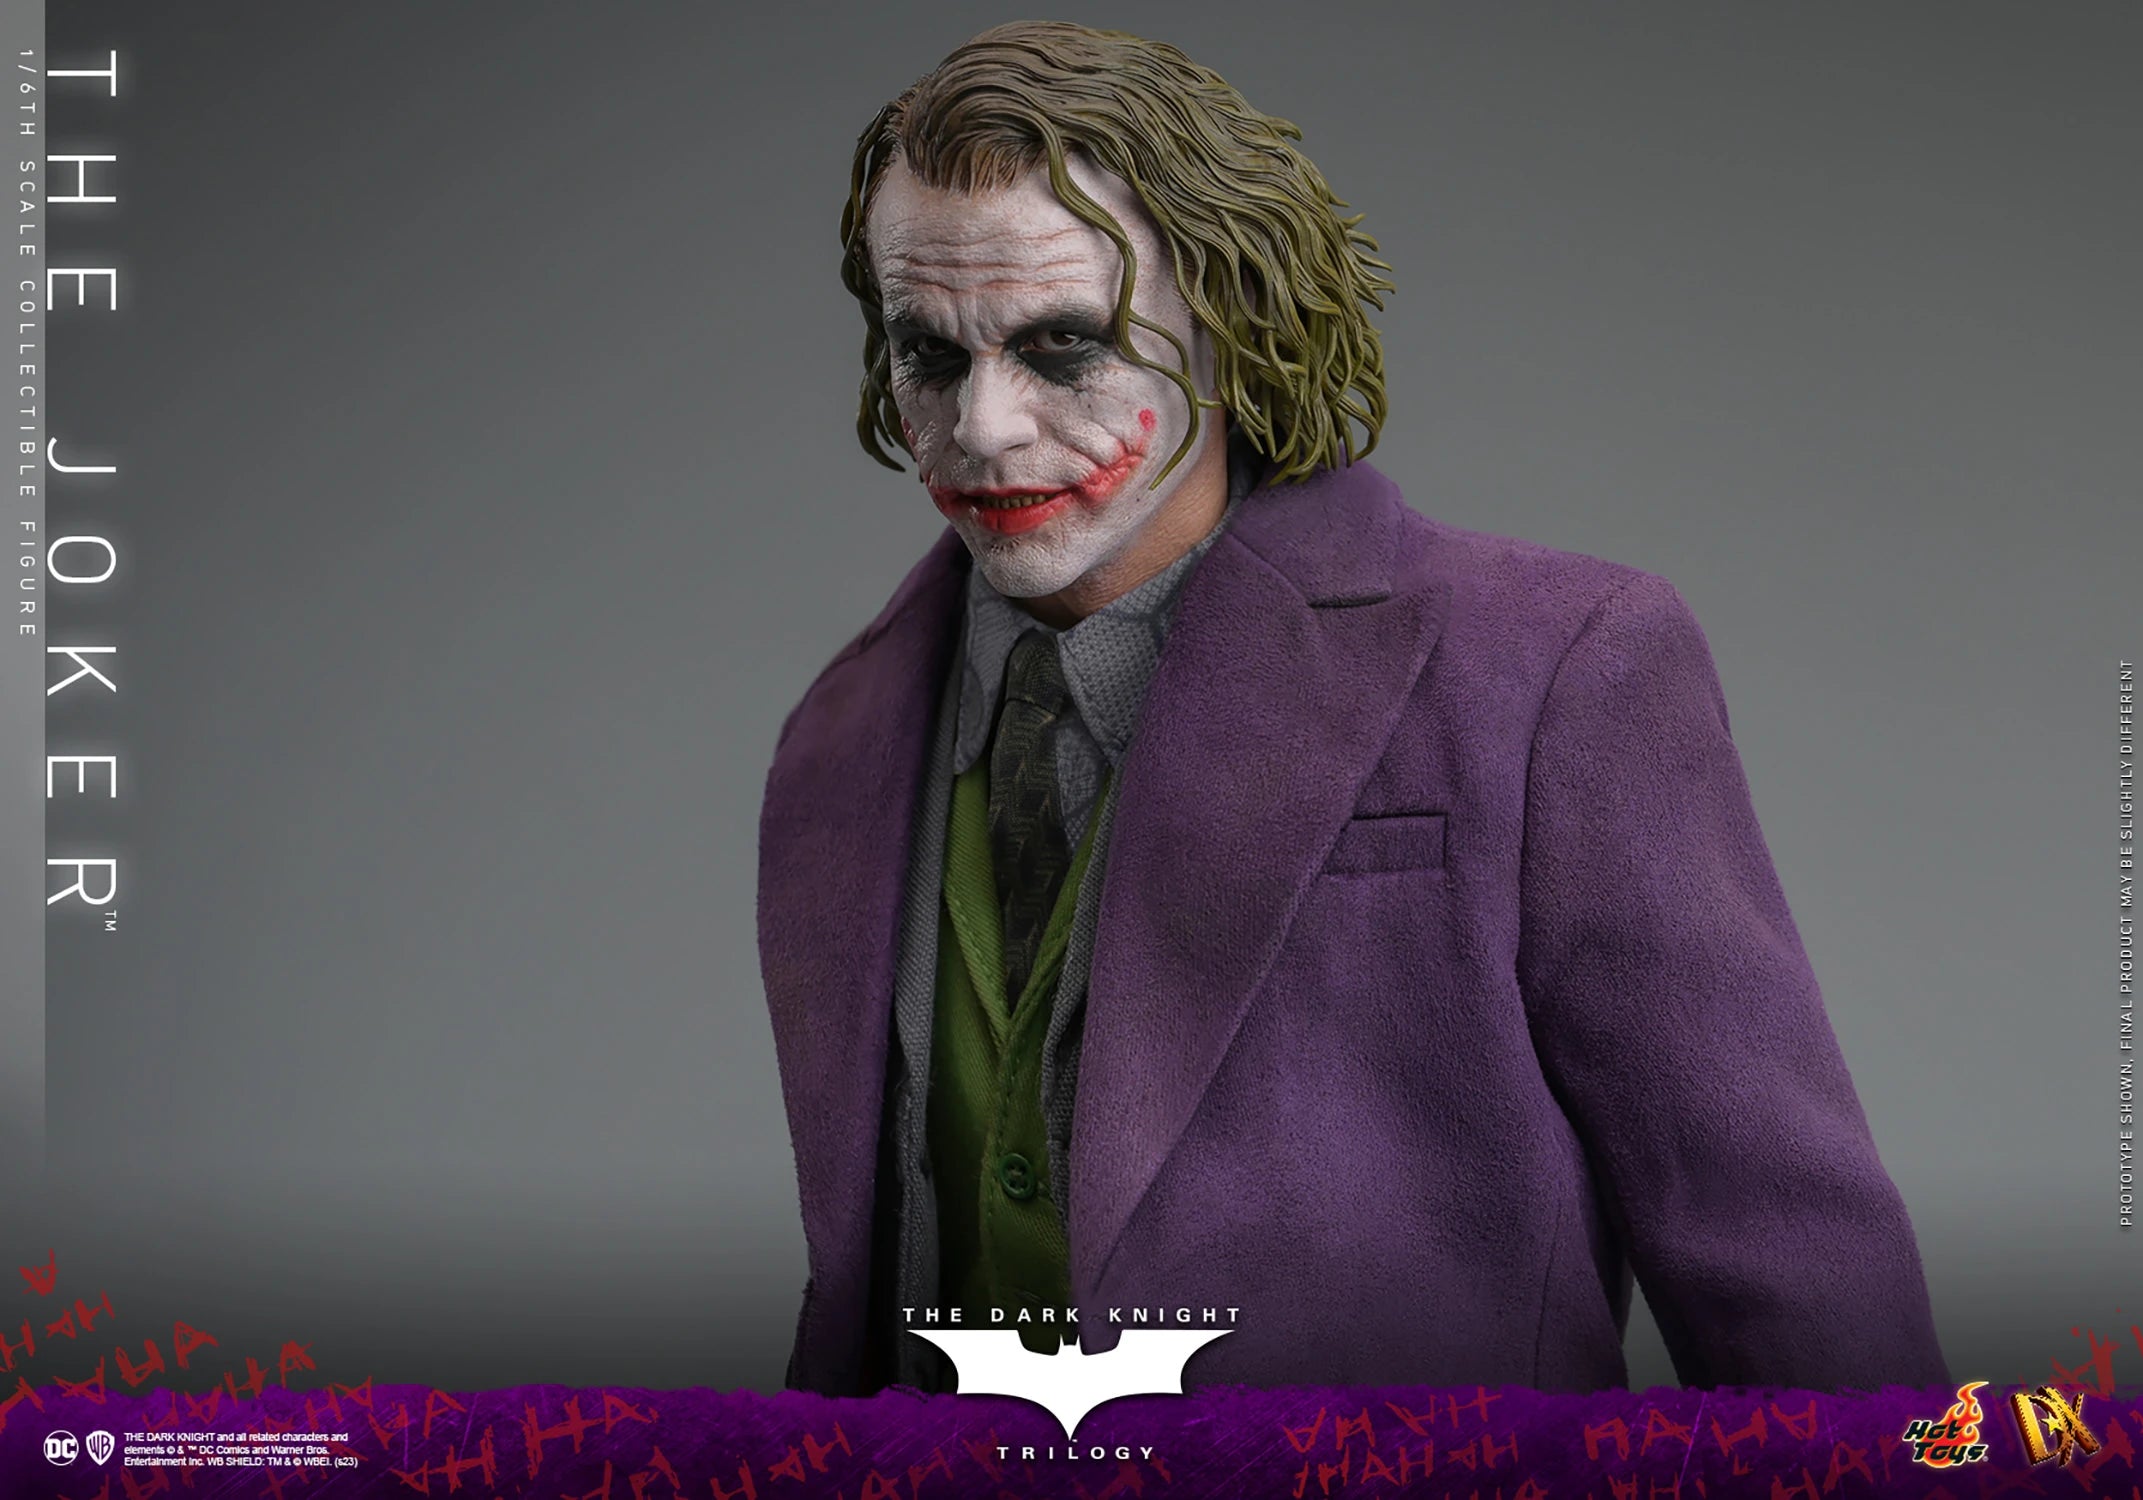 THE JOKER Sixth Scale Figure By Hot Toys